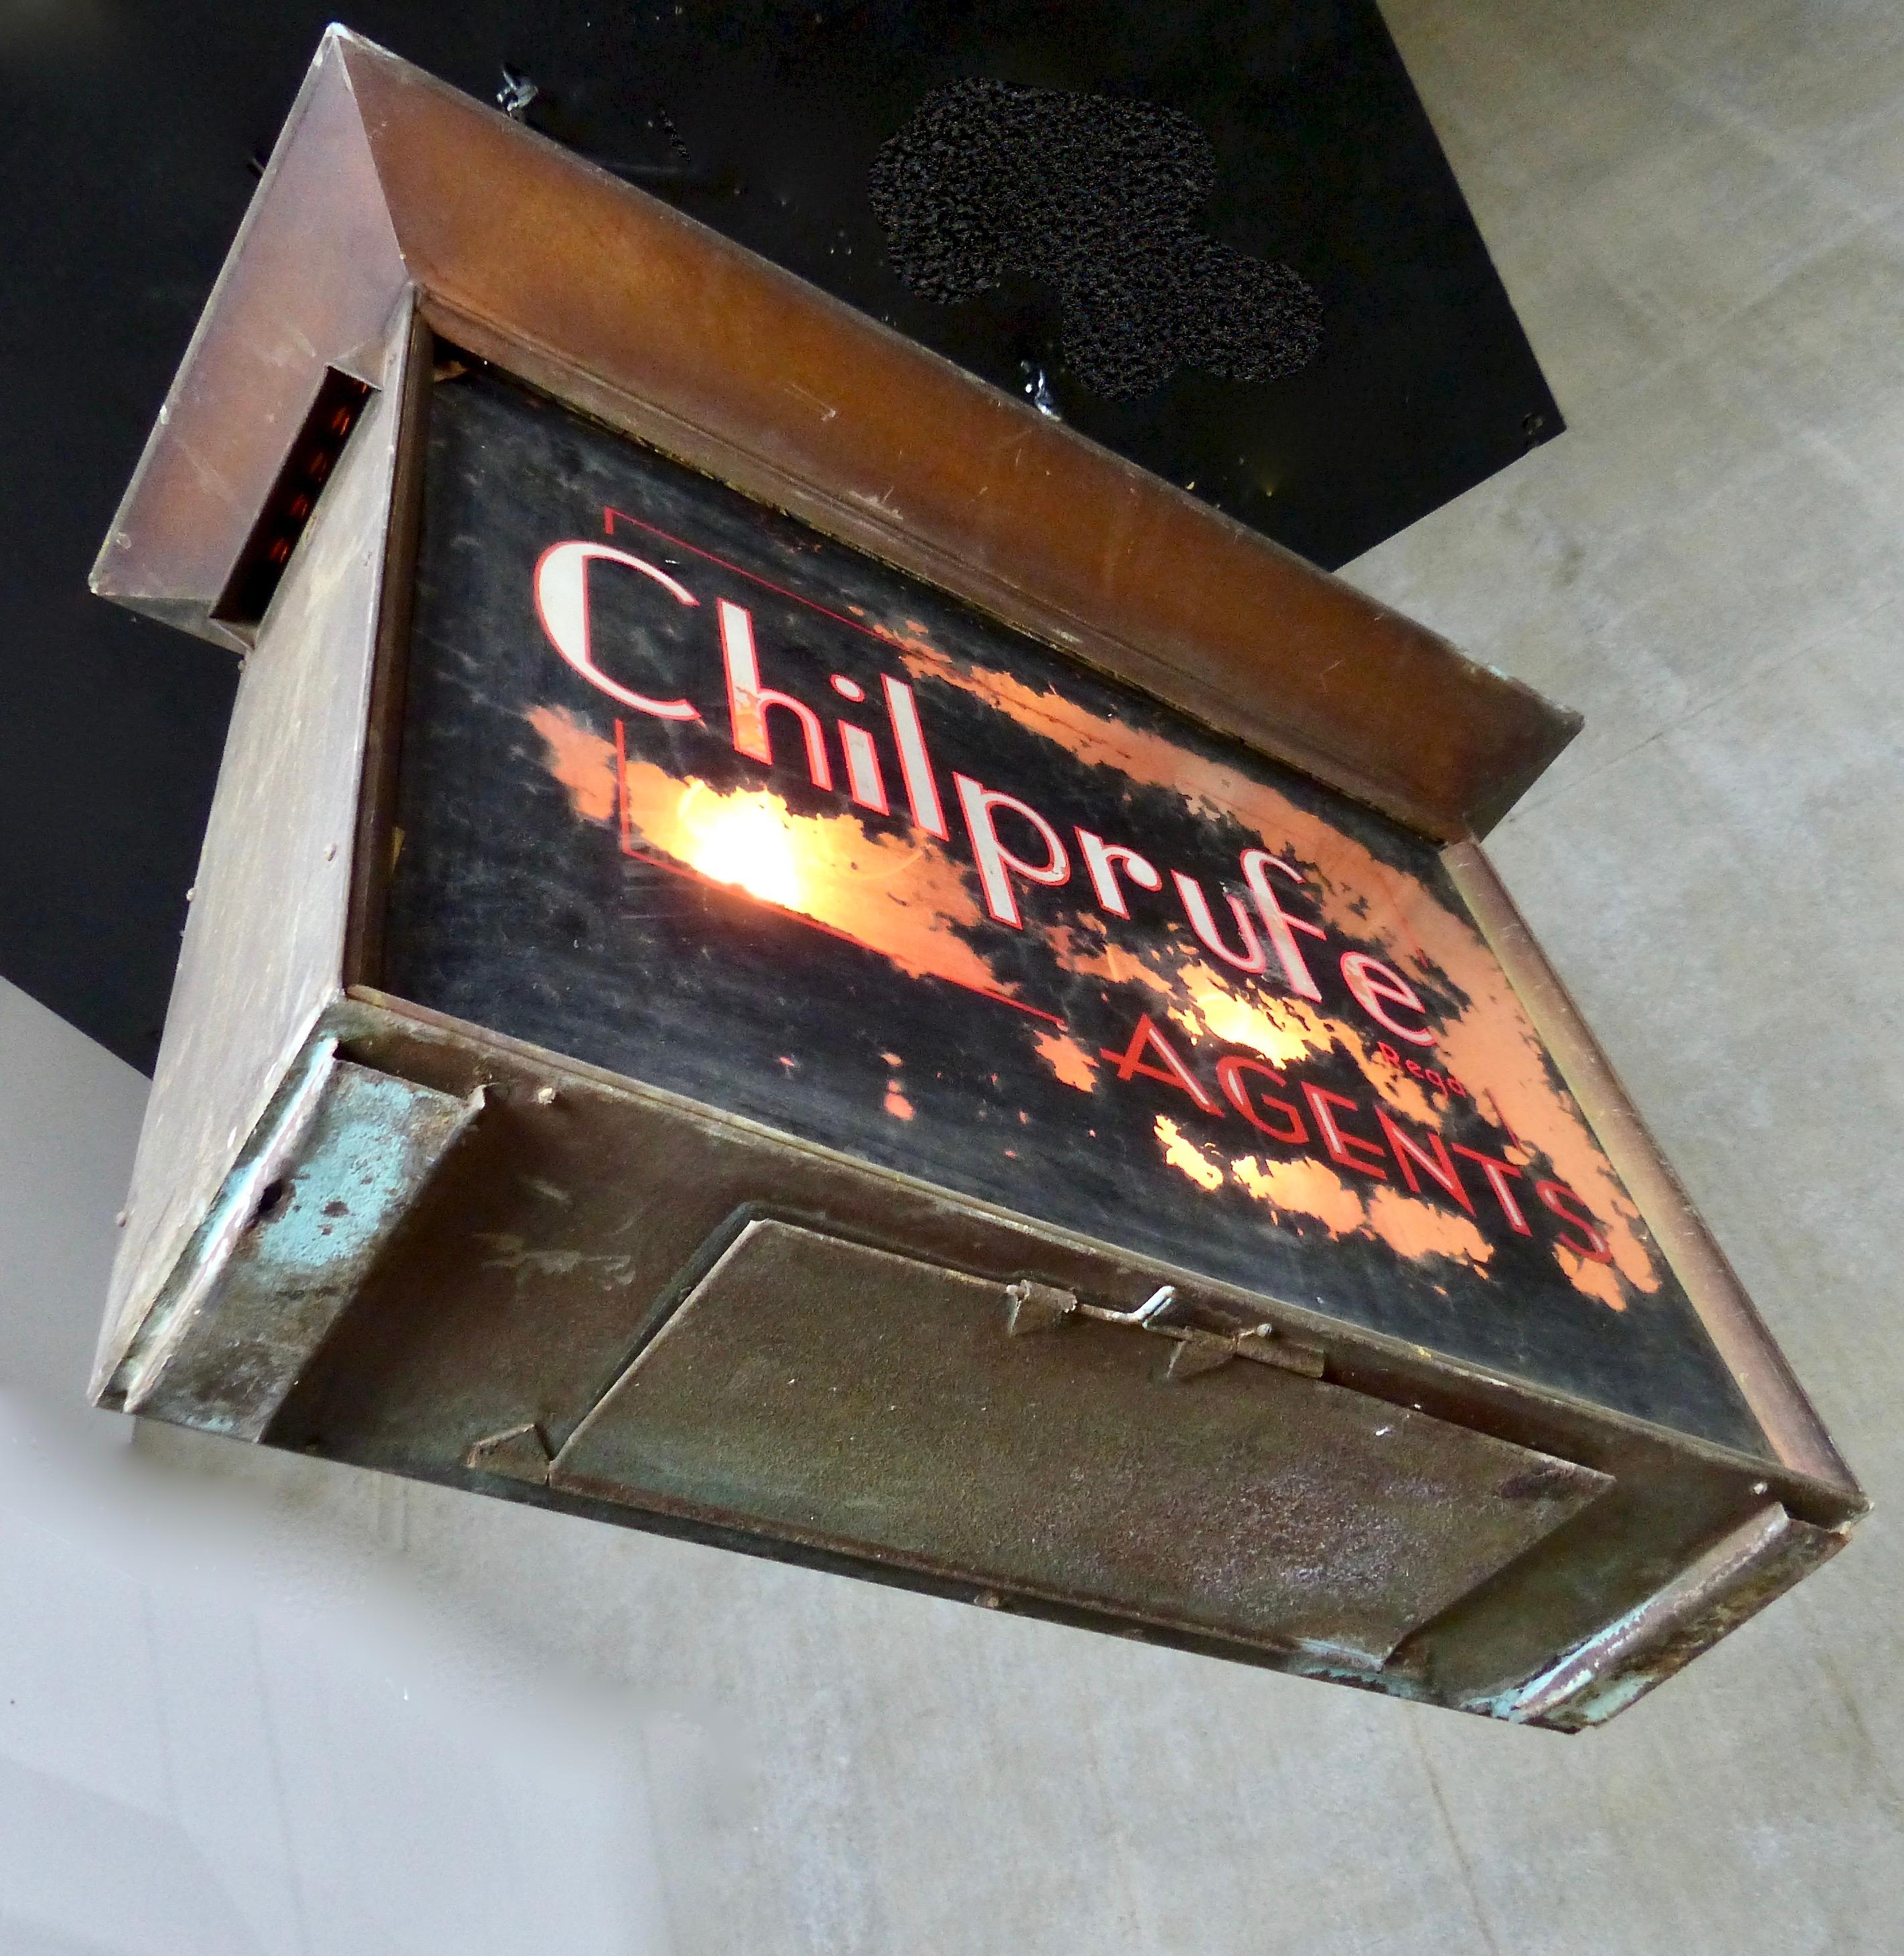 An electric, double-sided outdoor sign promoting the English clothing manufacturer, Chilprufe Agents (operating between 1920 and 1950). The company’s logo has been reverse painted on glass. The sign has been re-wired and CSA approved to current